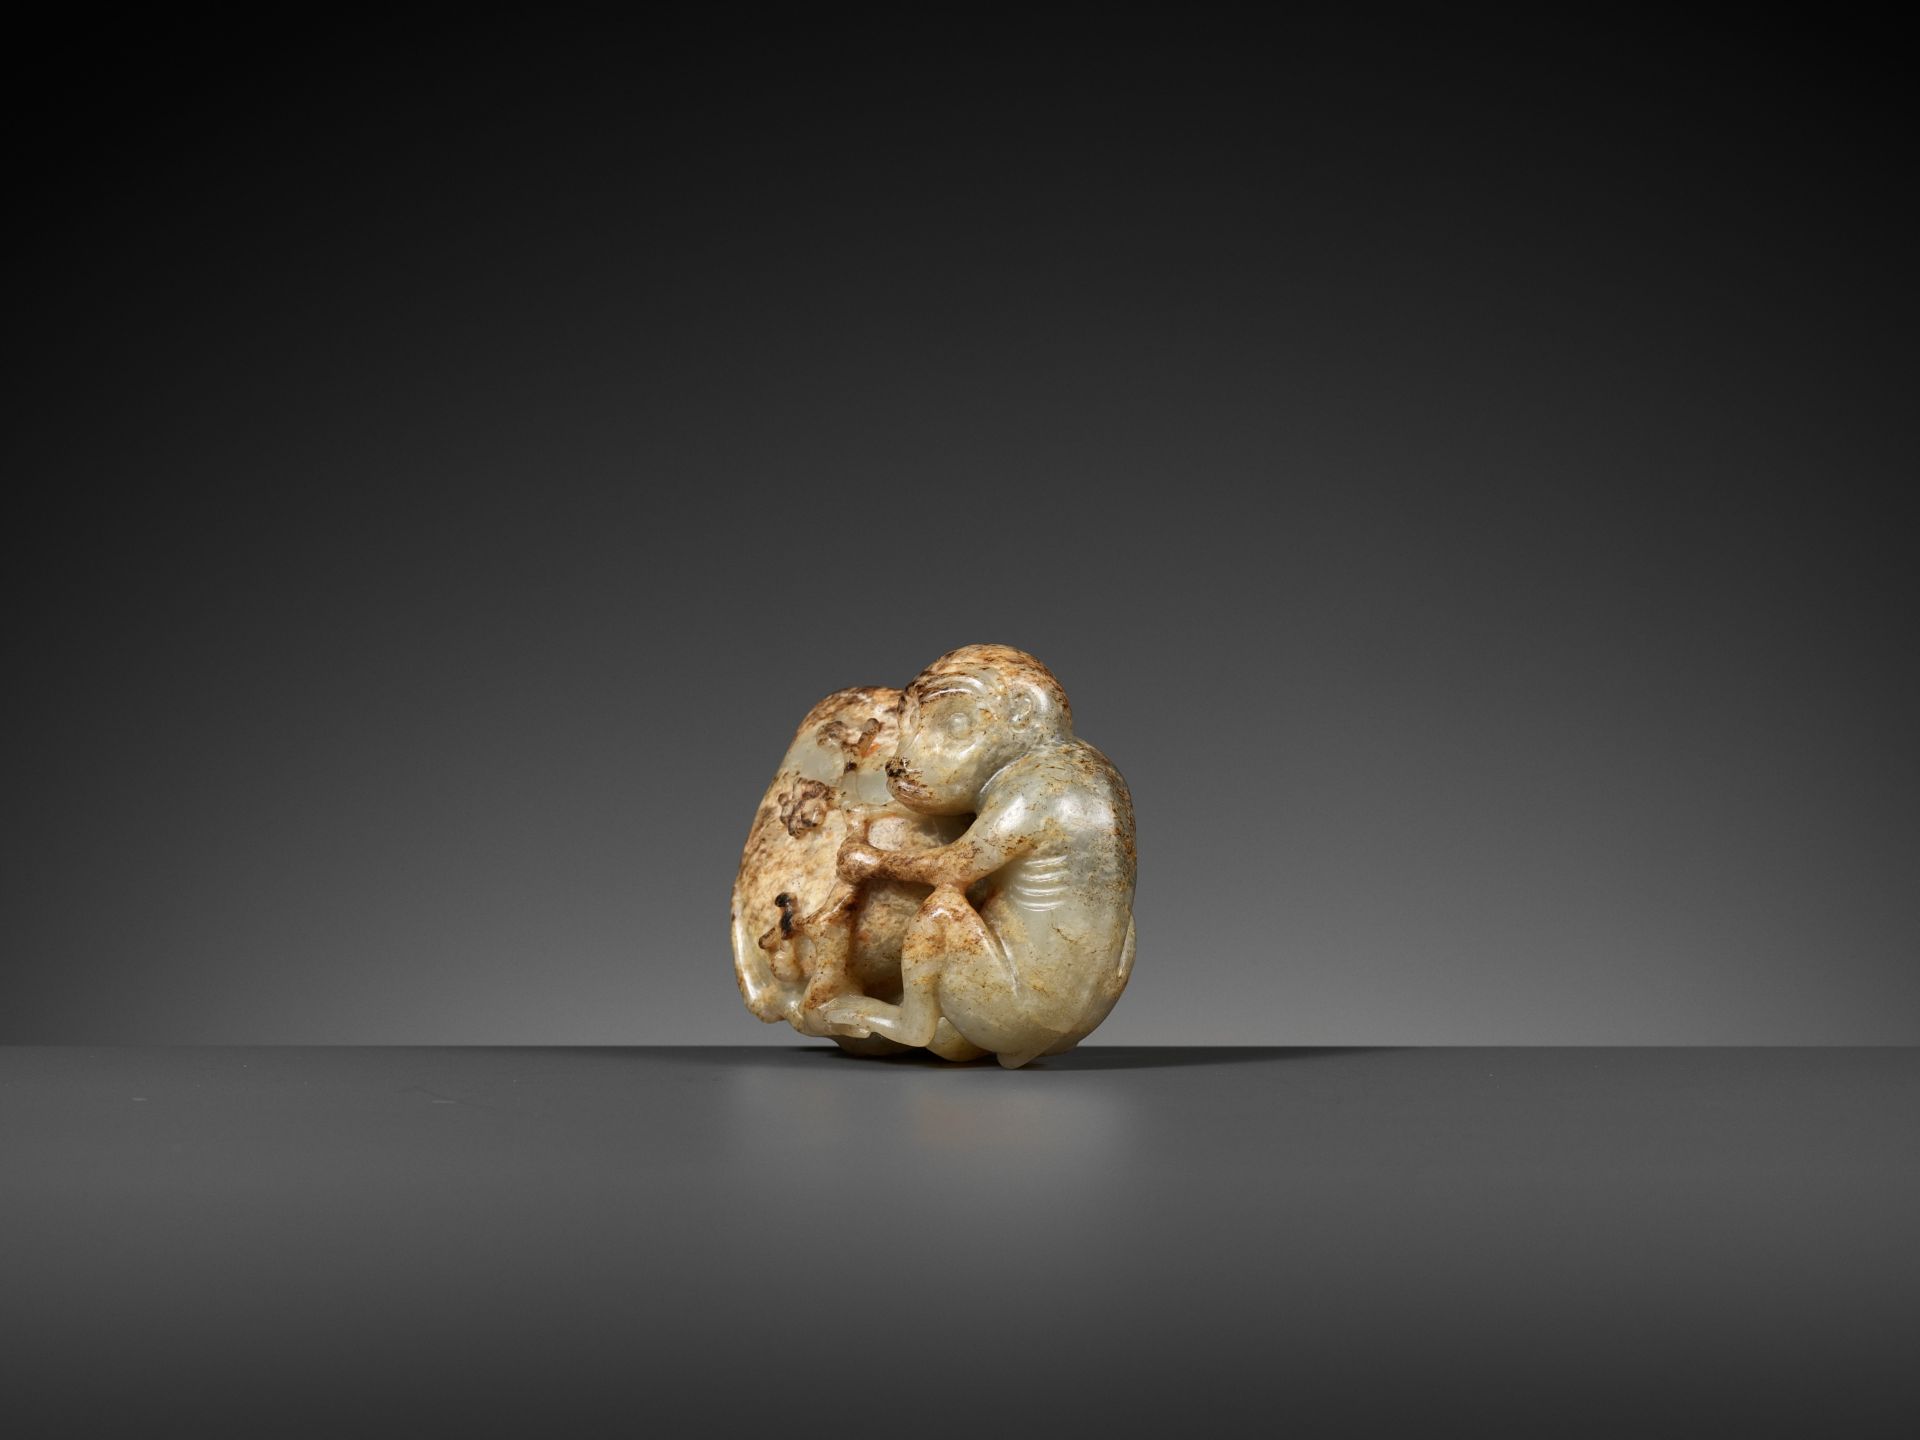 A MOTTLED PALE CELADON JADE 'MONKEY AND PEACH' FIGURE, 17TH - 18TH CENTURY - Image 5 of 10